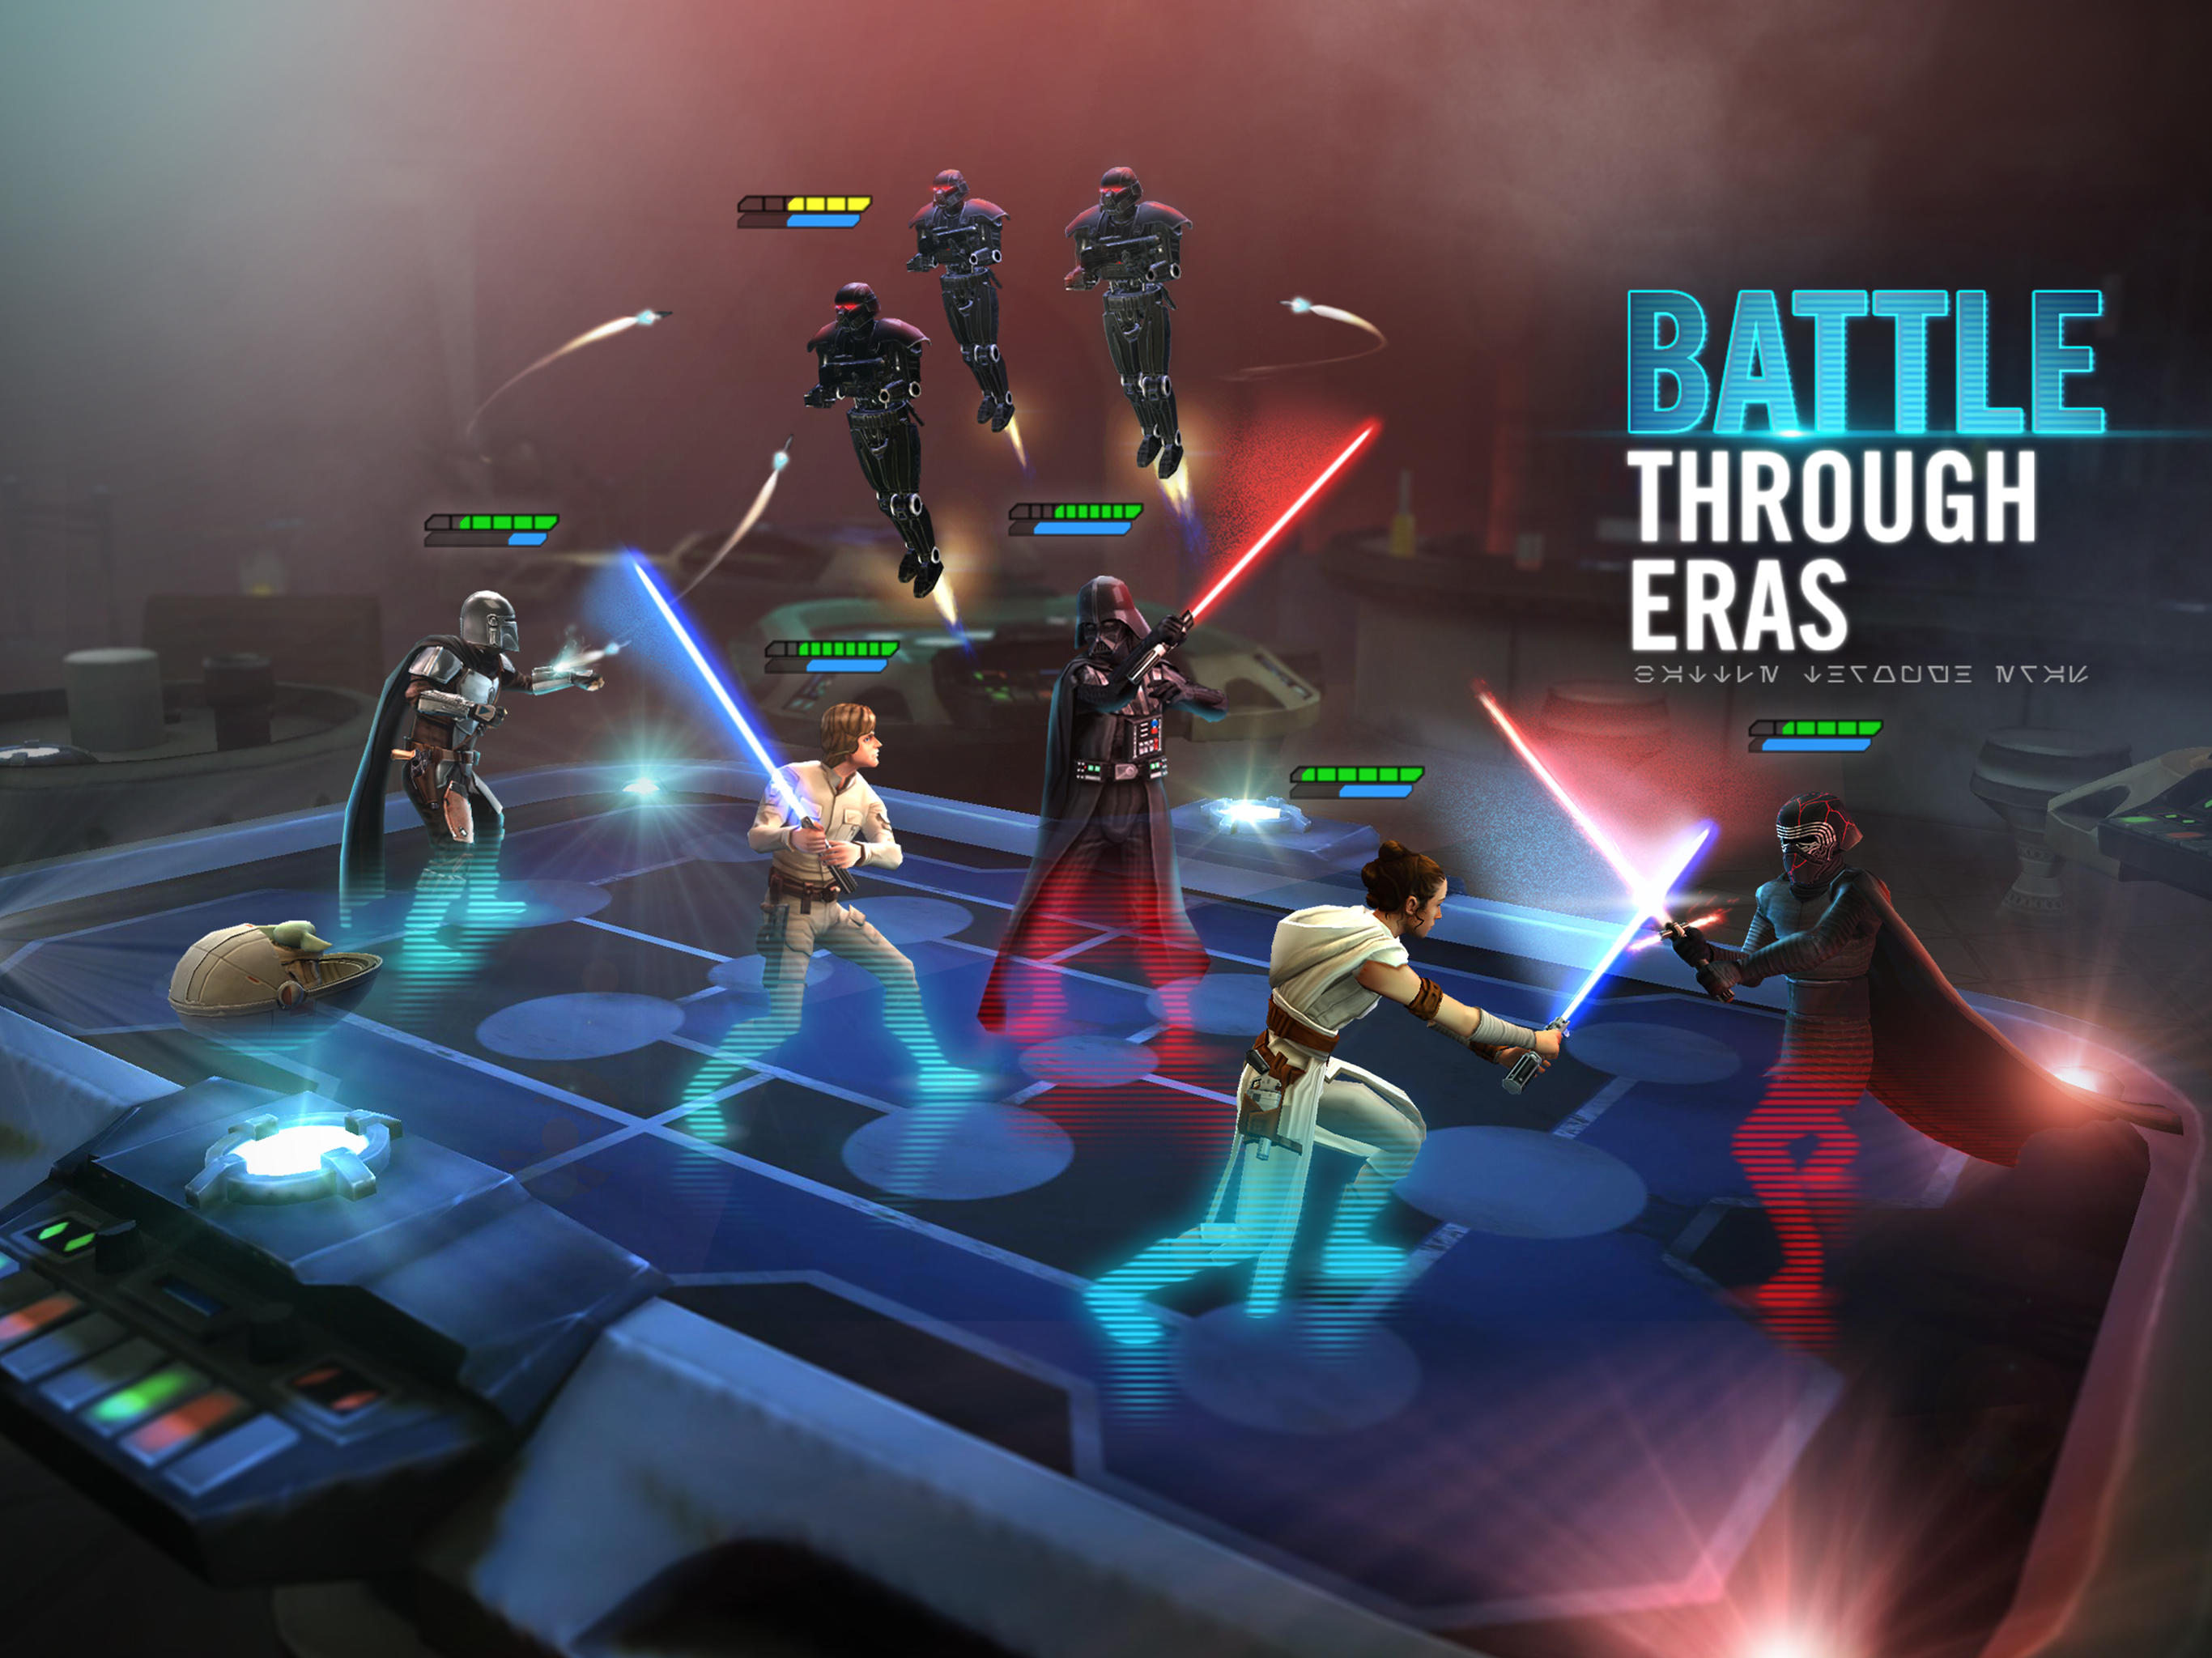 Roblox's Space Battle Event, Sponsored by Star Wars: The Last Jedi